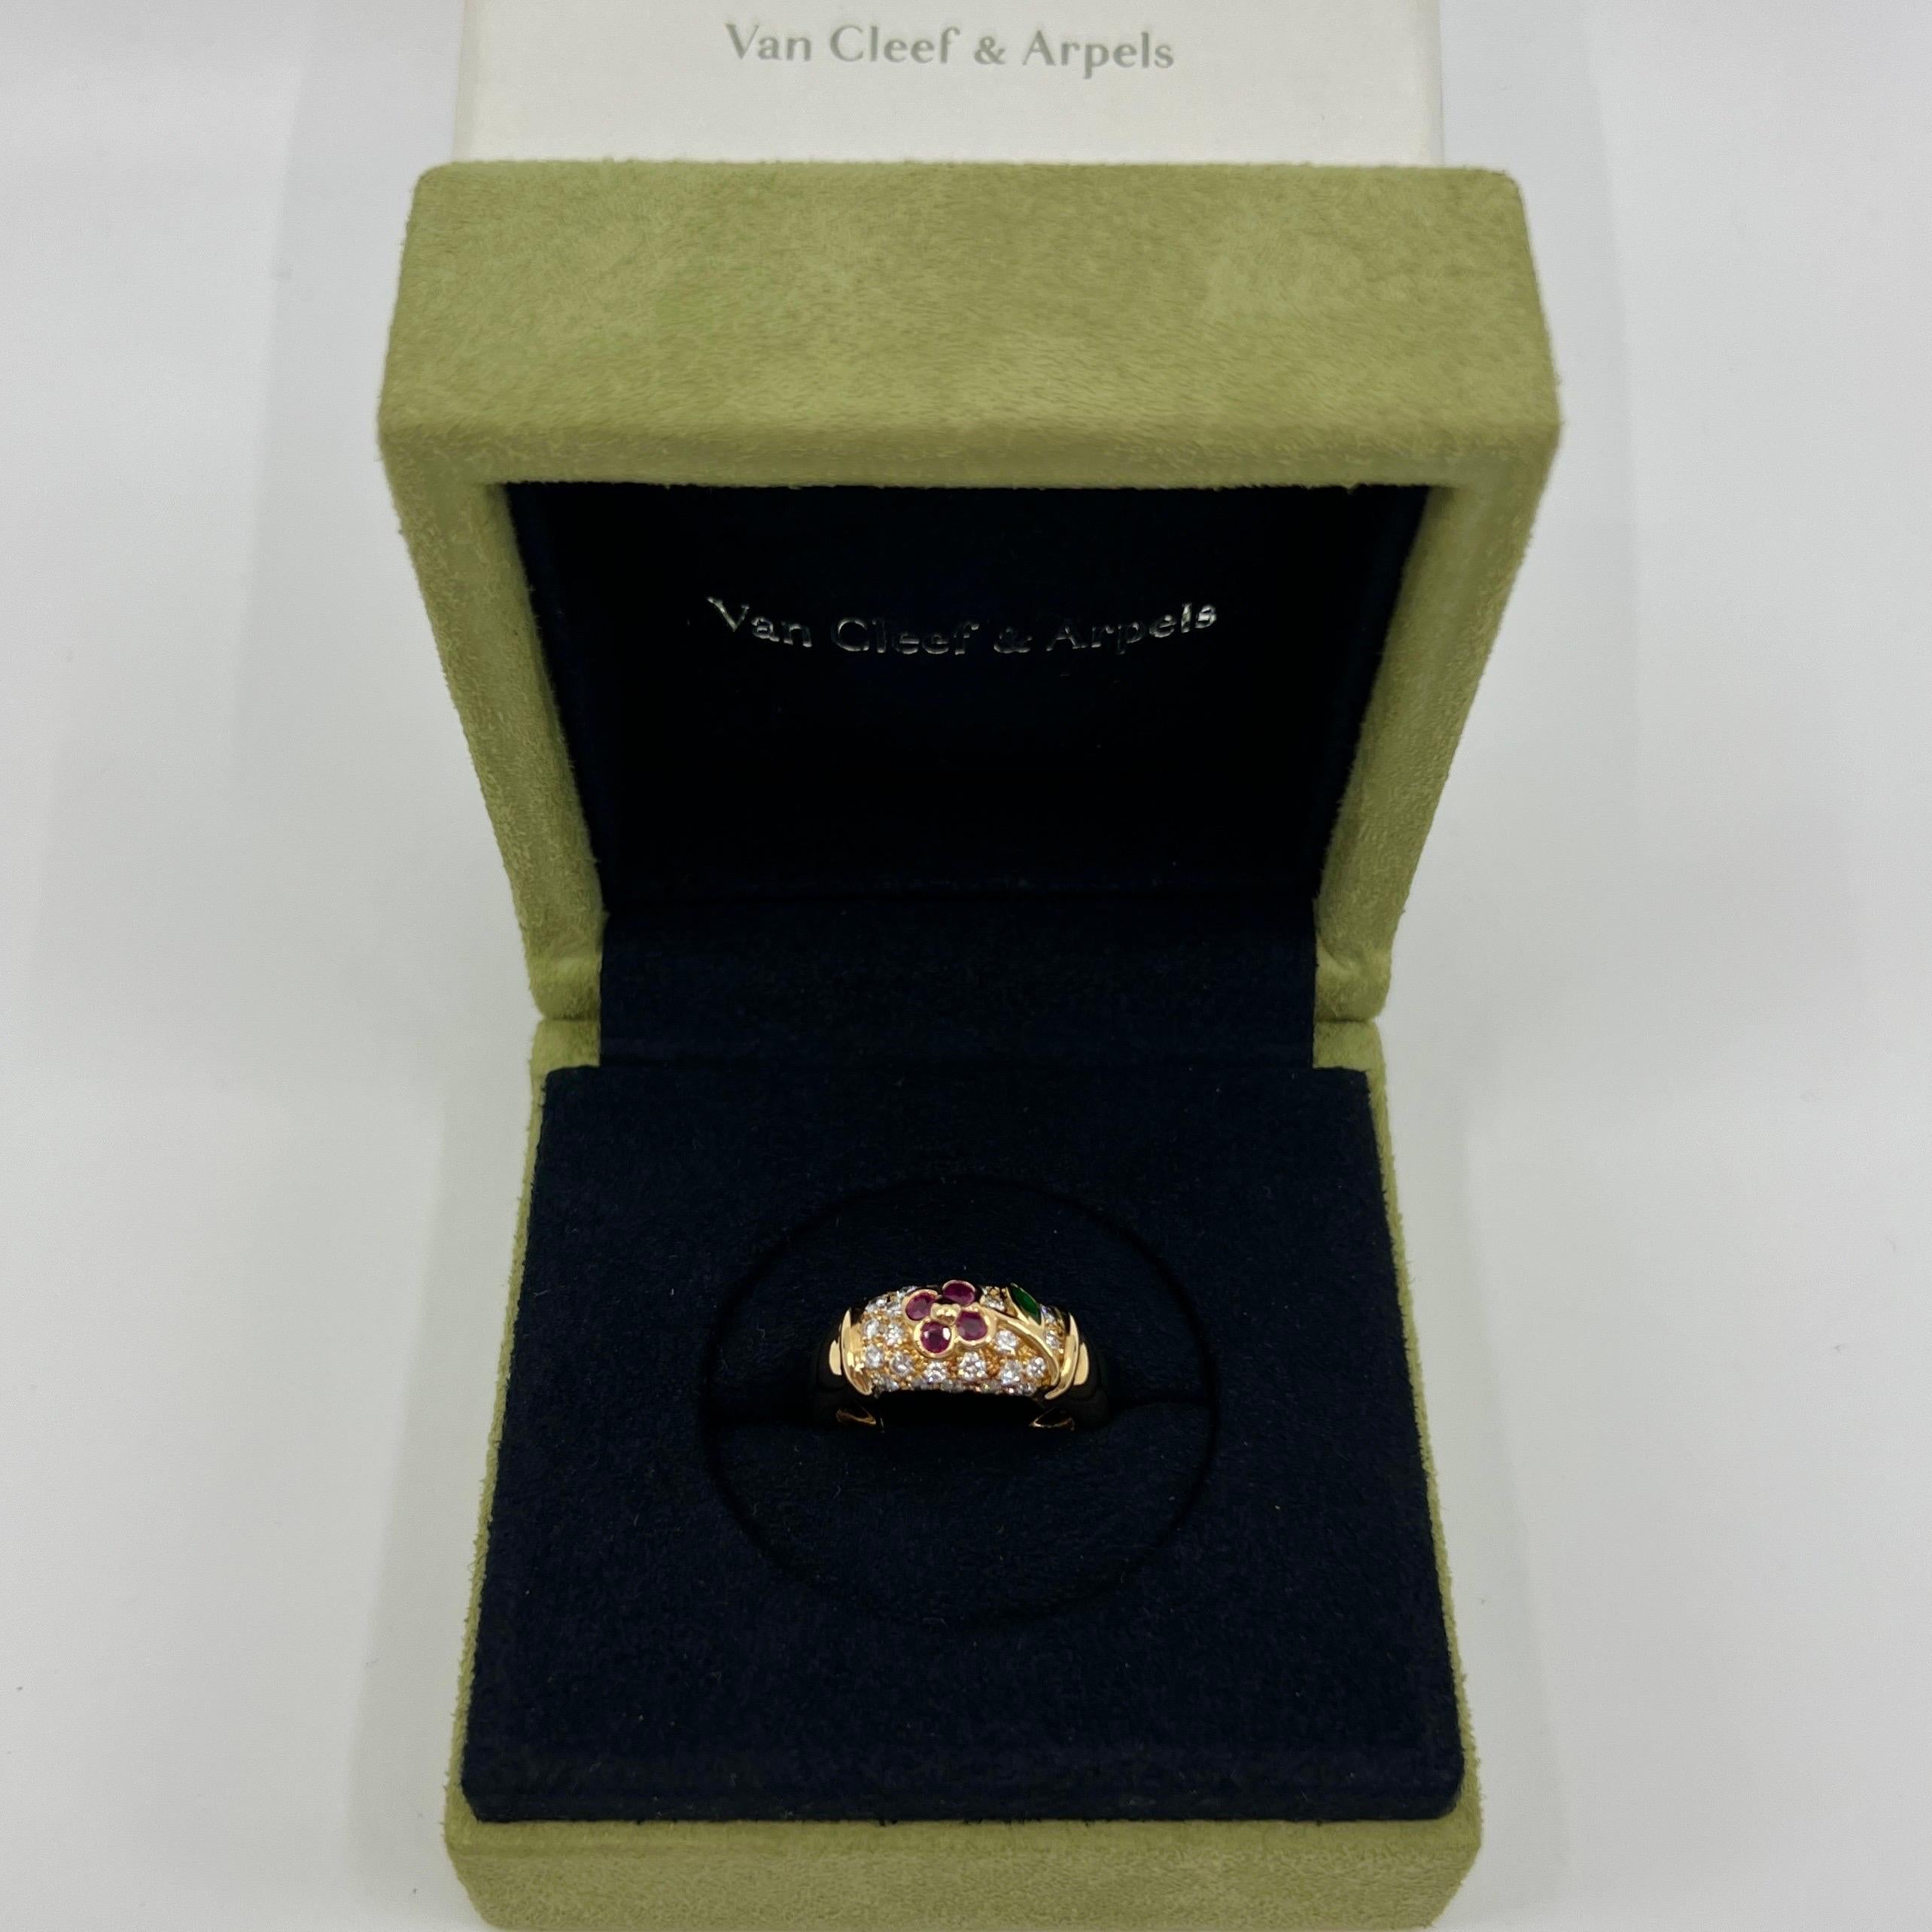 Rare Vintage Van Cleef & Arpels Fine Ruby, Emerald And Diamond 18k Yellow Gold Floral Flower Ring.

A stunning vintage ring with a unique floral design typical of Van Cleef & Arpels, set with a beautiful marquise cut fine green emerald measuring